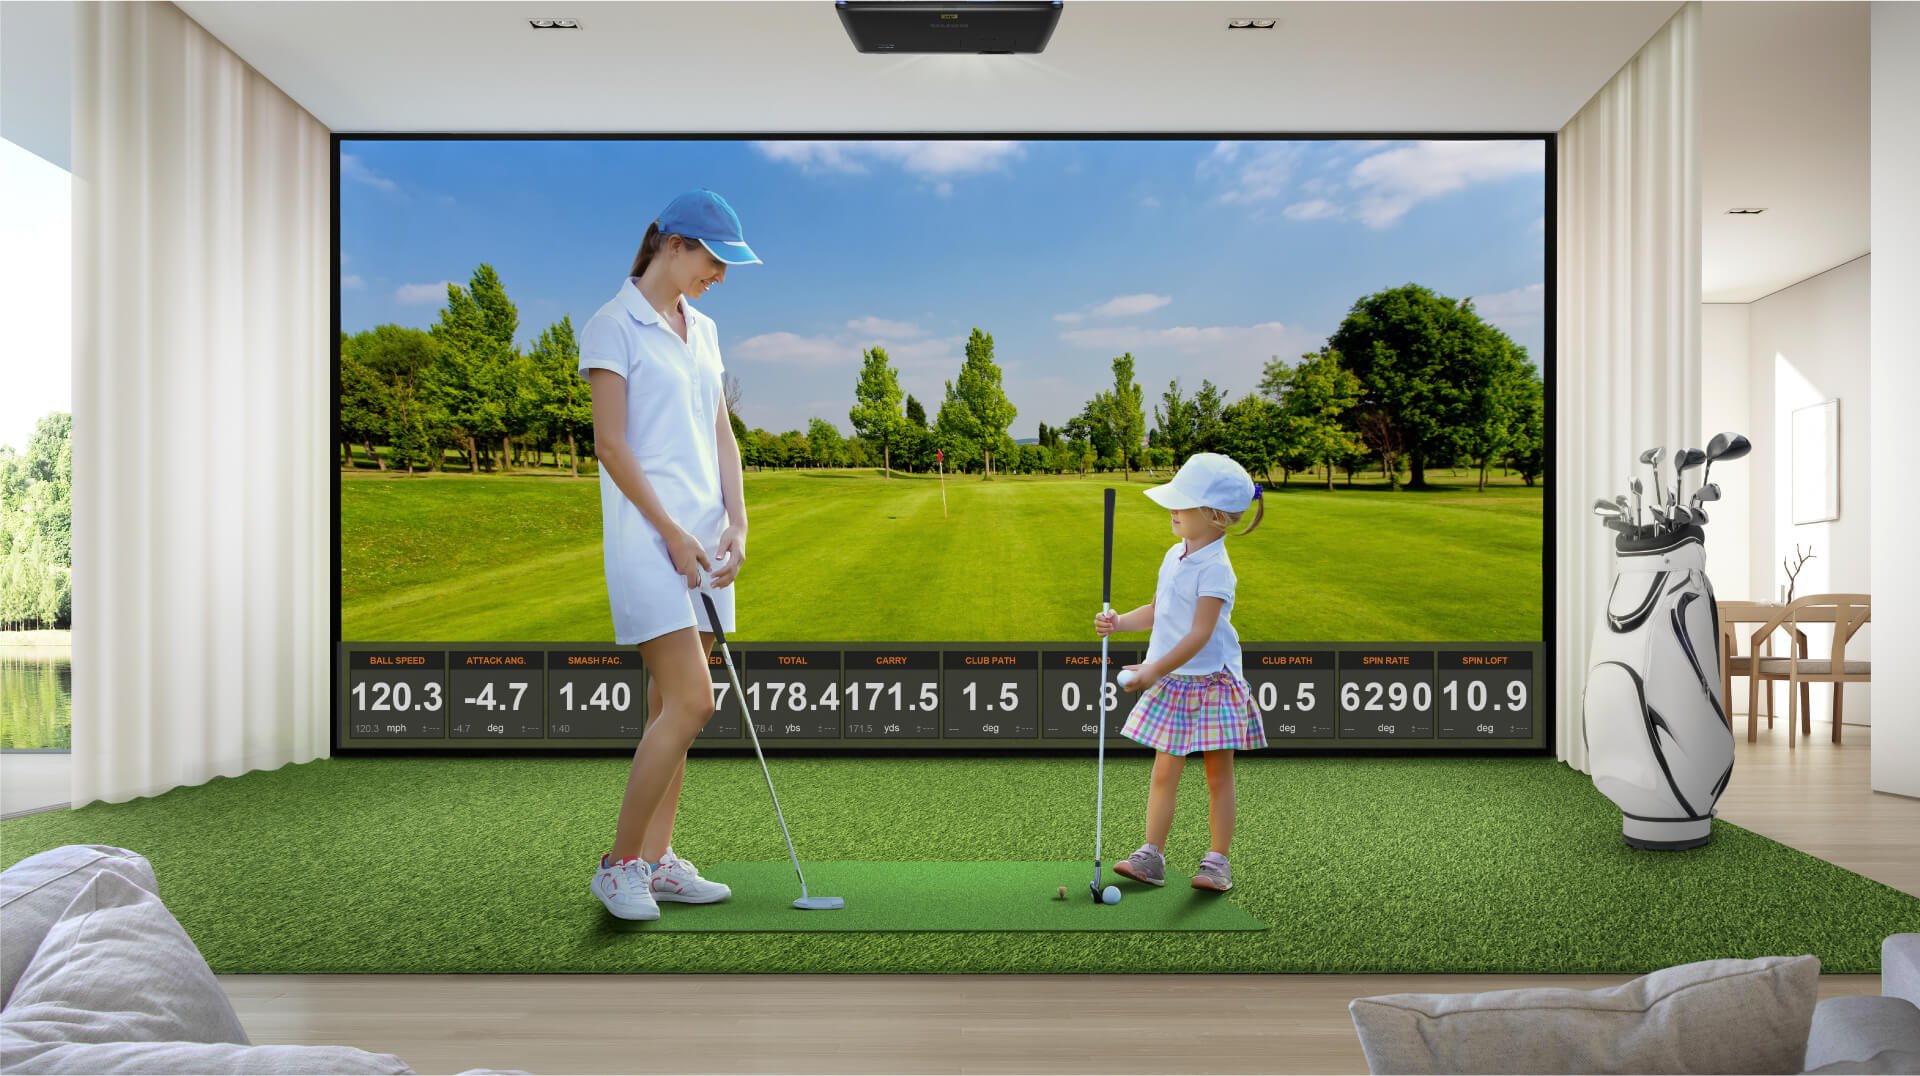 Enjoy quality time at home with family and BenQ golf simulation installation projectors